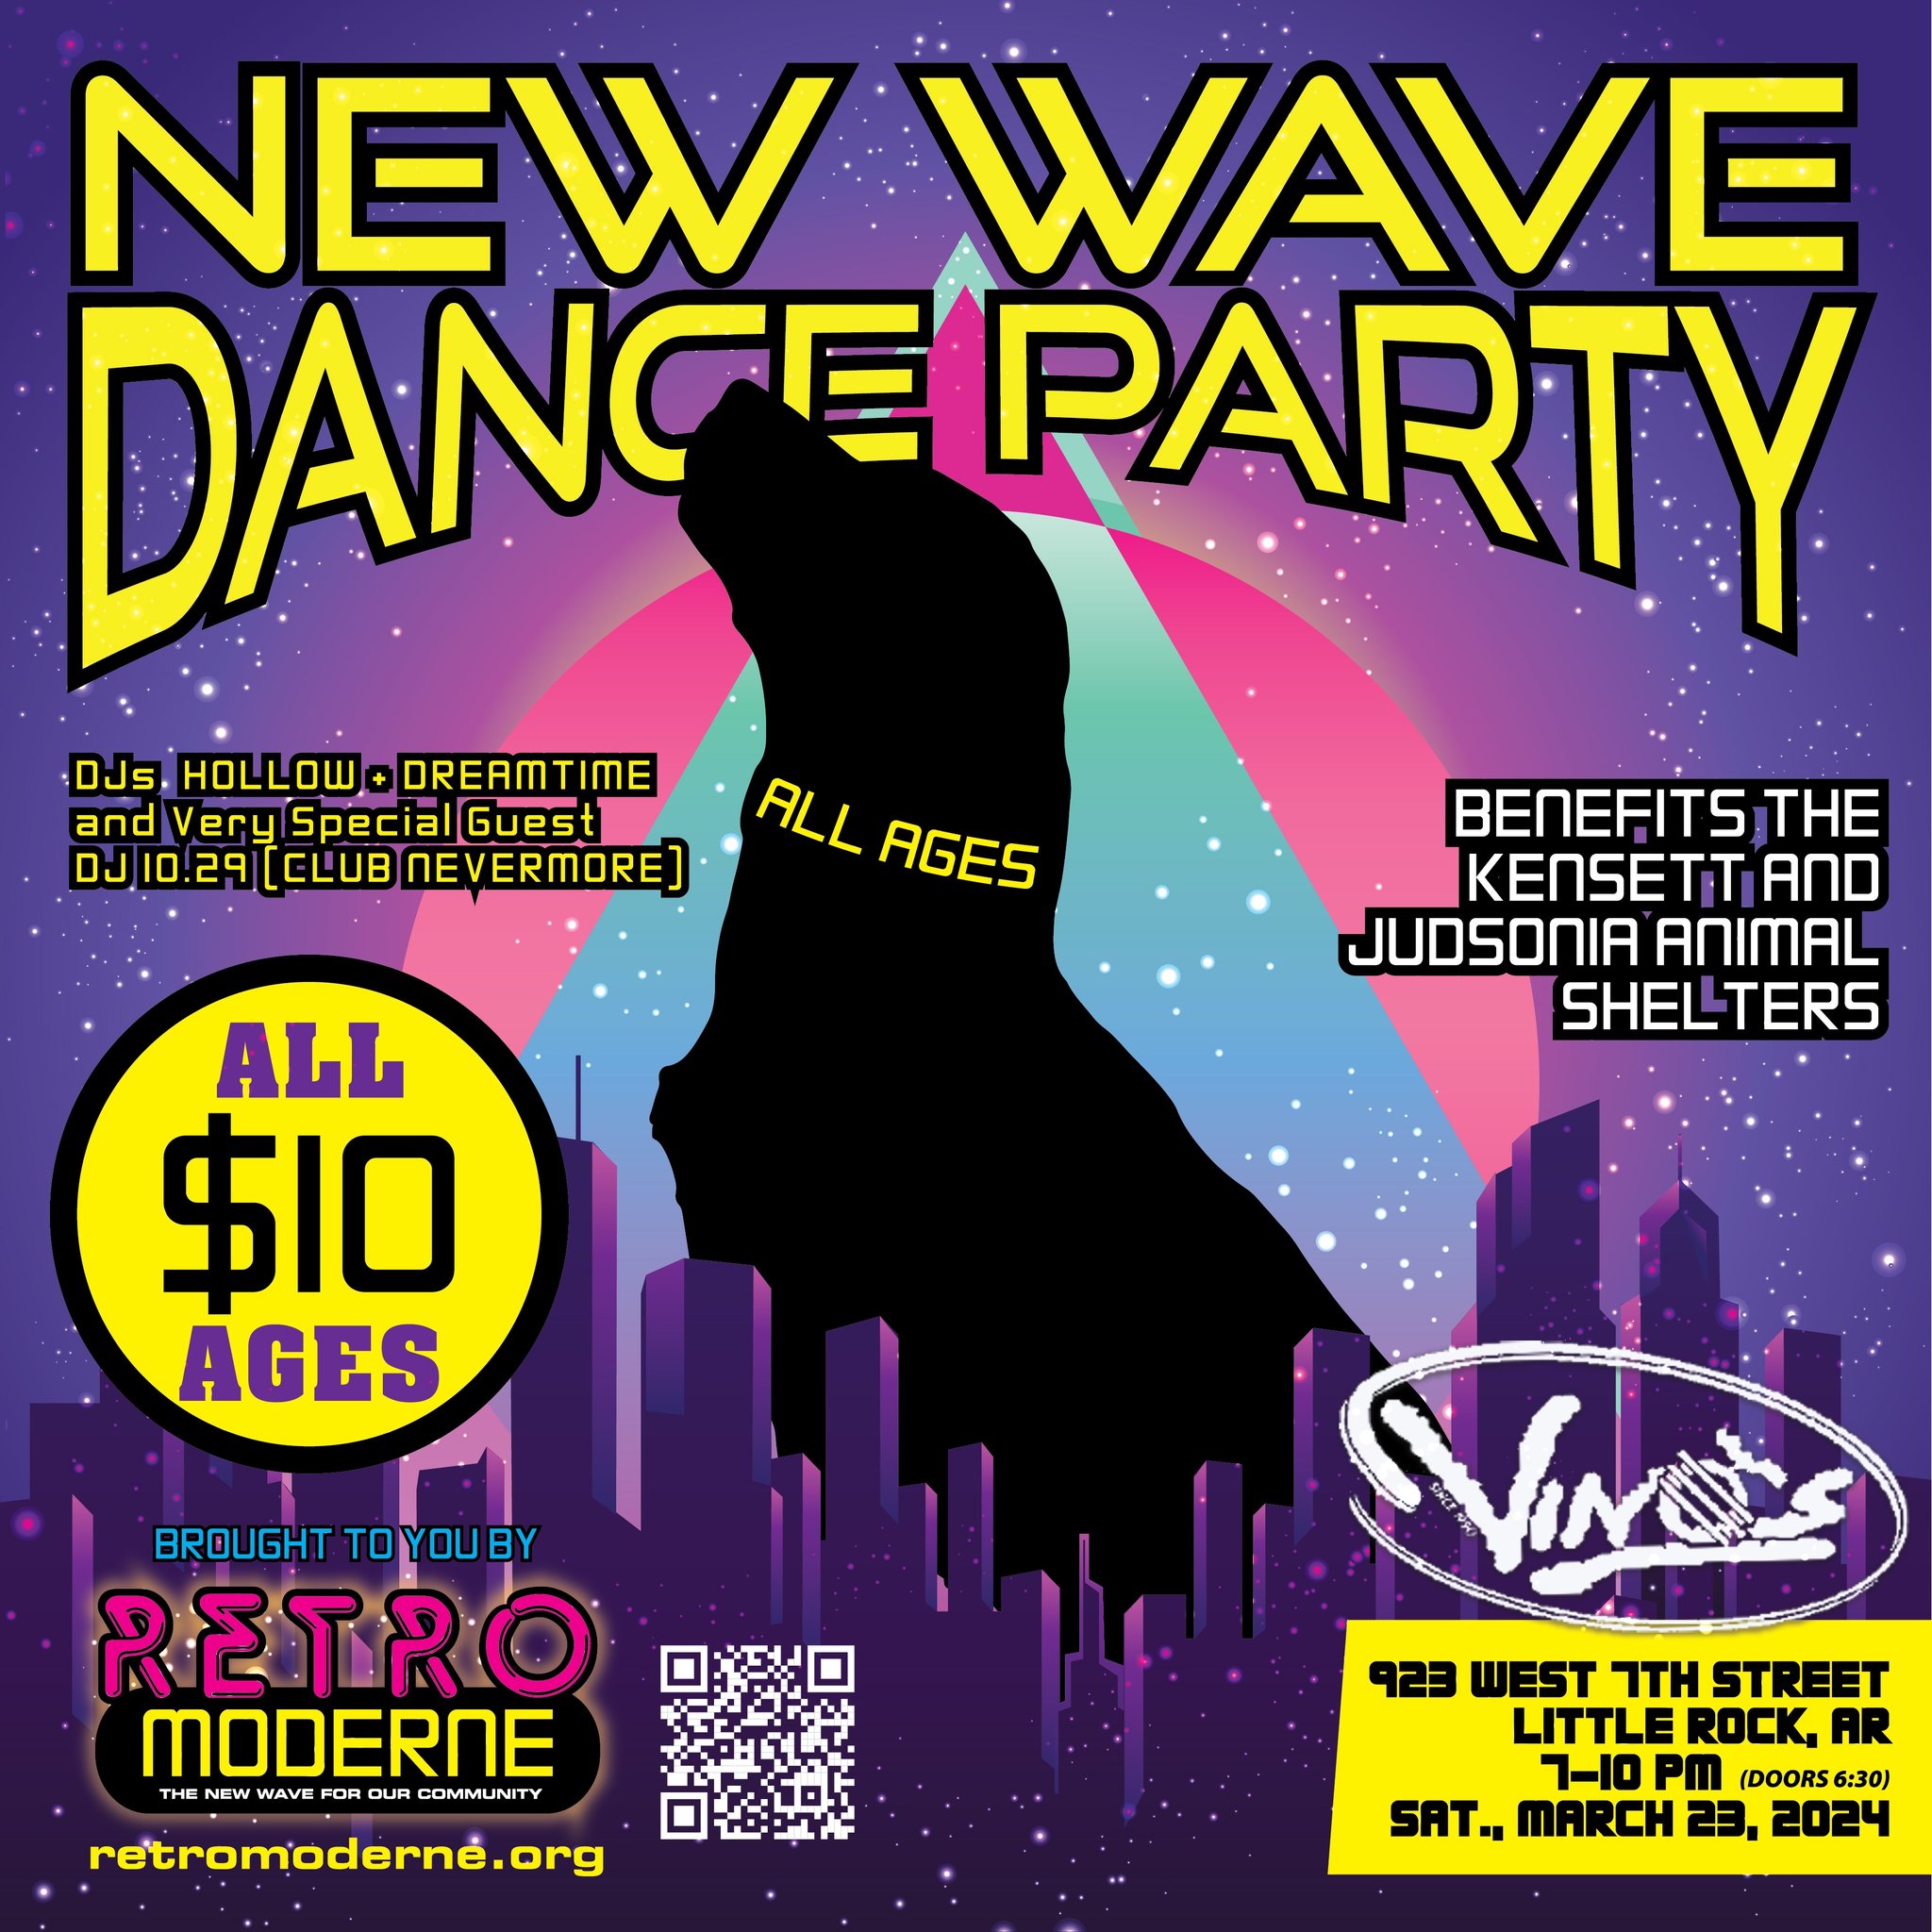 Flyer for Retro Moderne. The text reads, &ldquo;Retro Moderne New Wave Dance Party. DJ Hollow, DJ Dreamtime, and Club Nevermore&rsquo;s DJ 10.29. Benefits Kensett and Judsonia Animal Shelters. Saturday, March 23, 2024. Doors open at 6:30, starts at 7 PM. All ages, $10. At Vino&rsquo;s, 923 West Seventh Street, Little Rock, Arkansas.&rdquo;